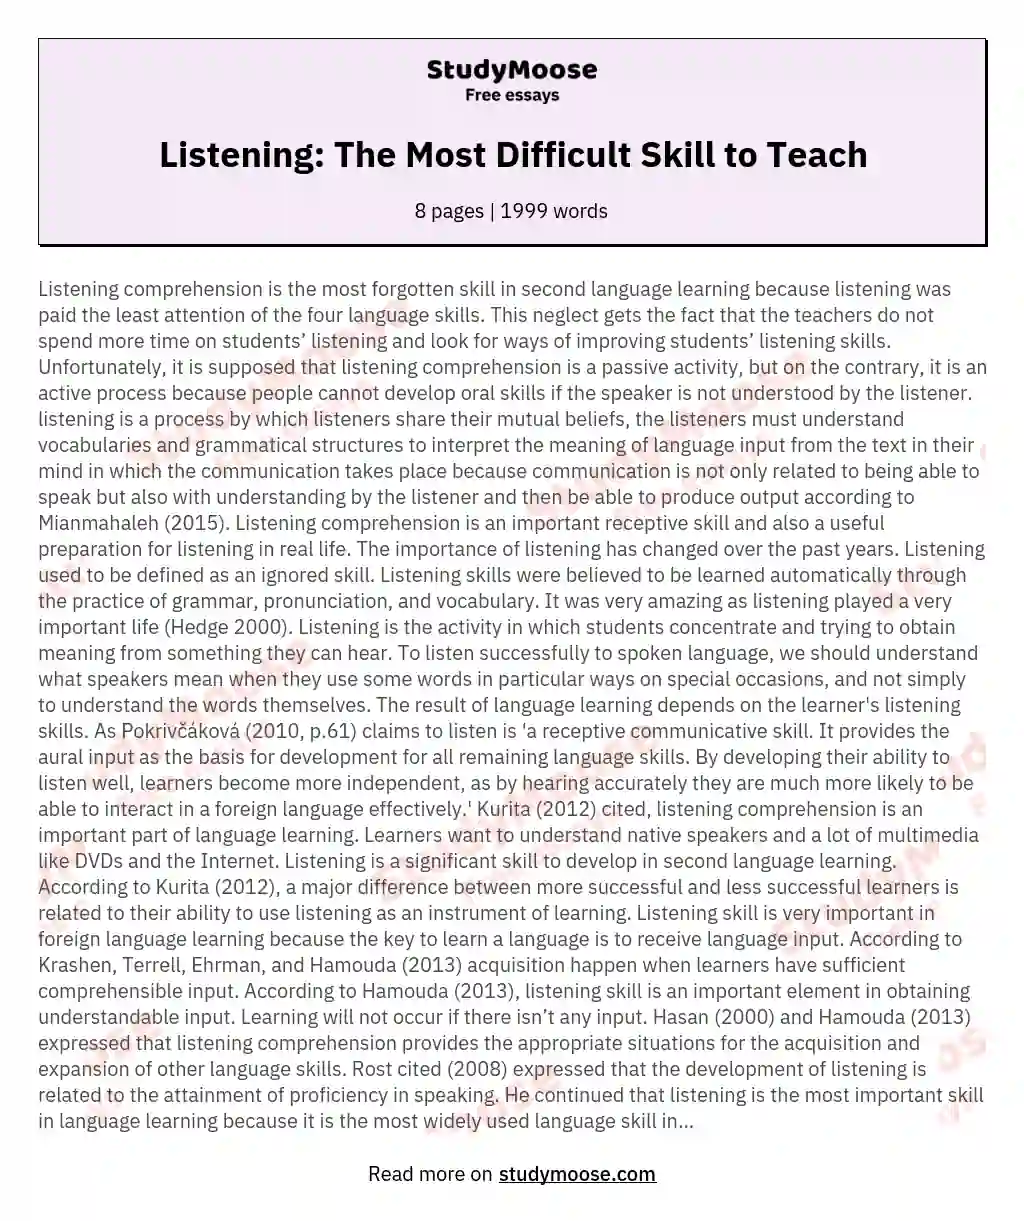 Listening: The Most Difficult Skill to Teach